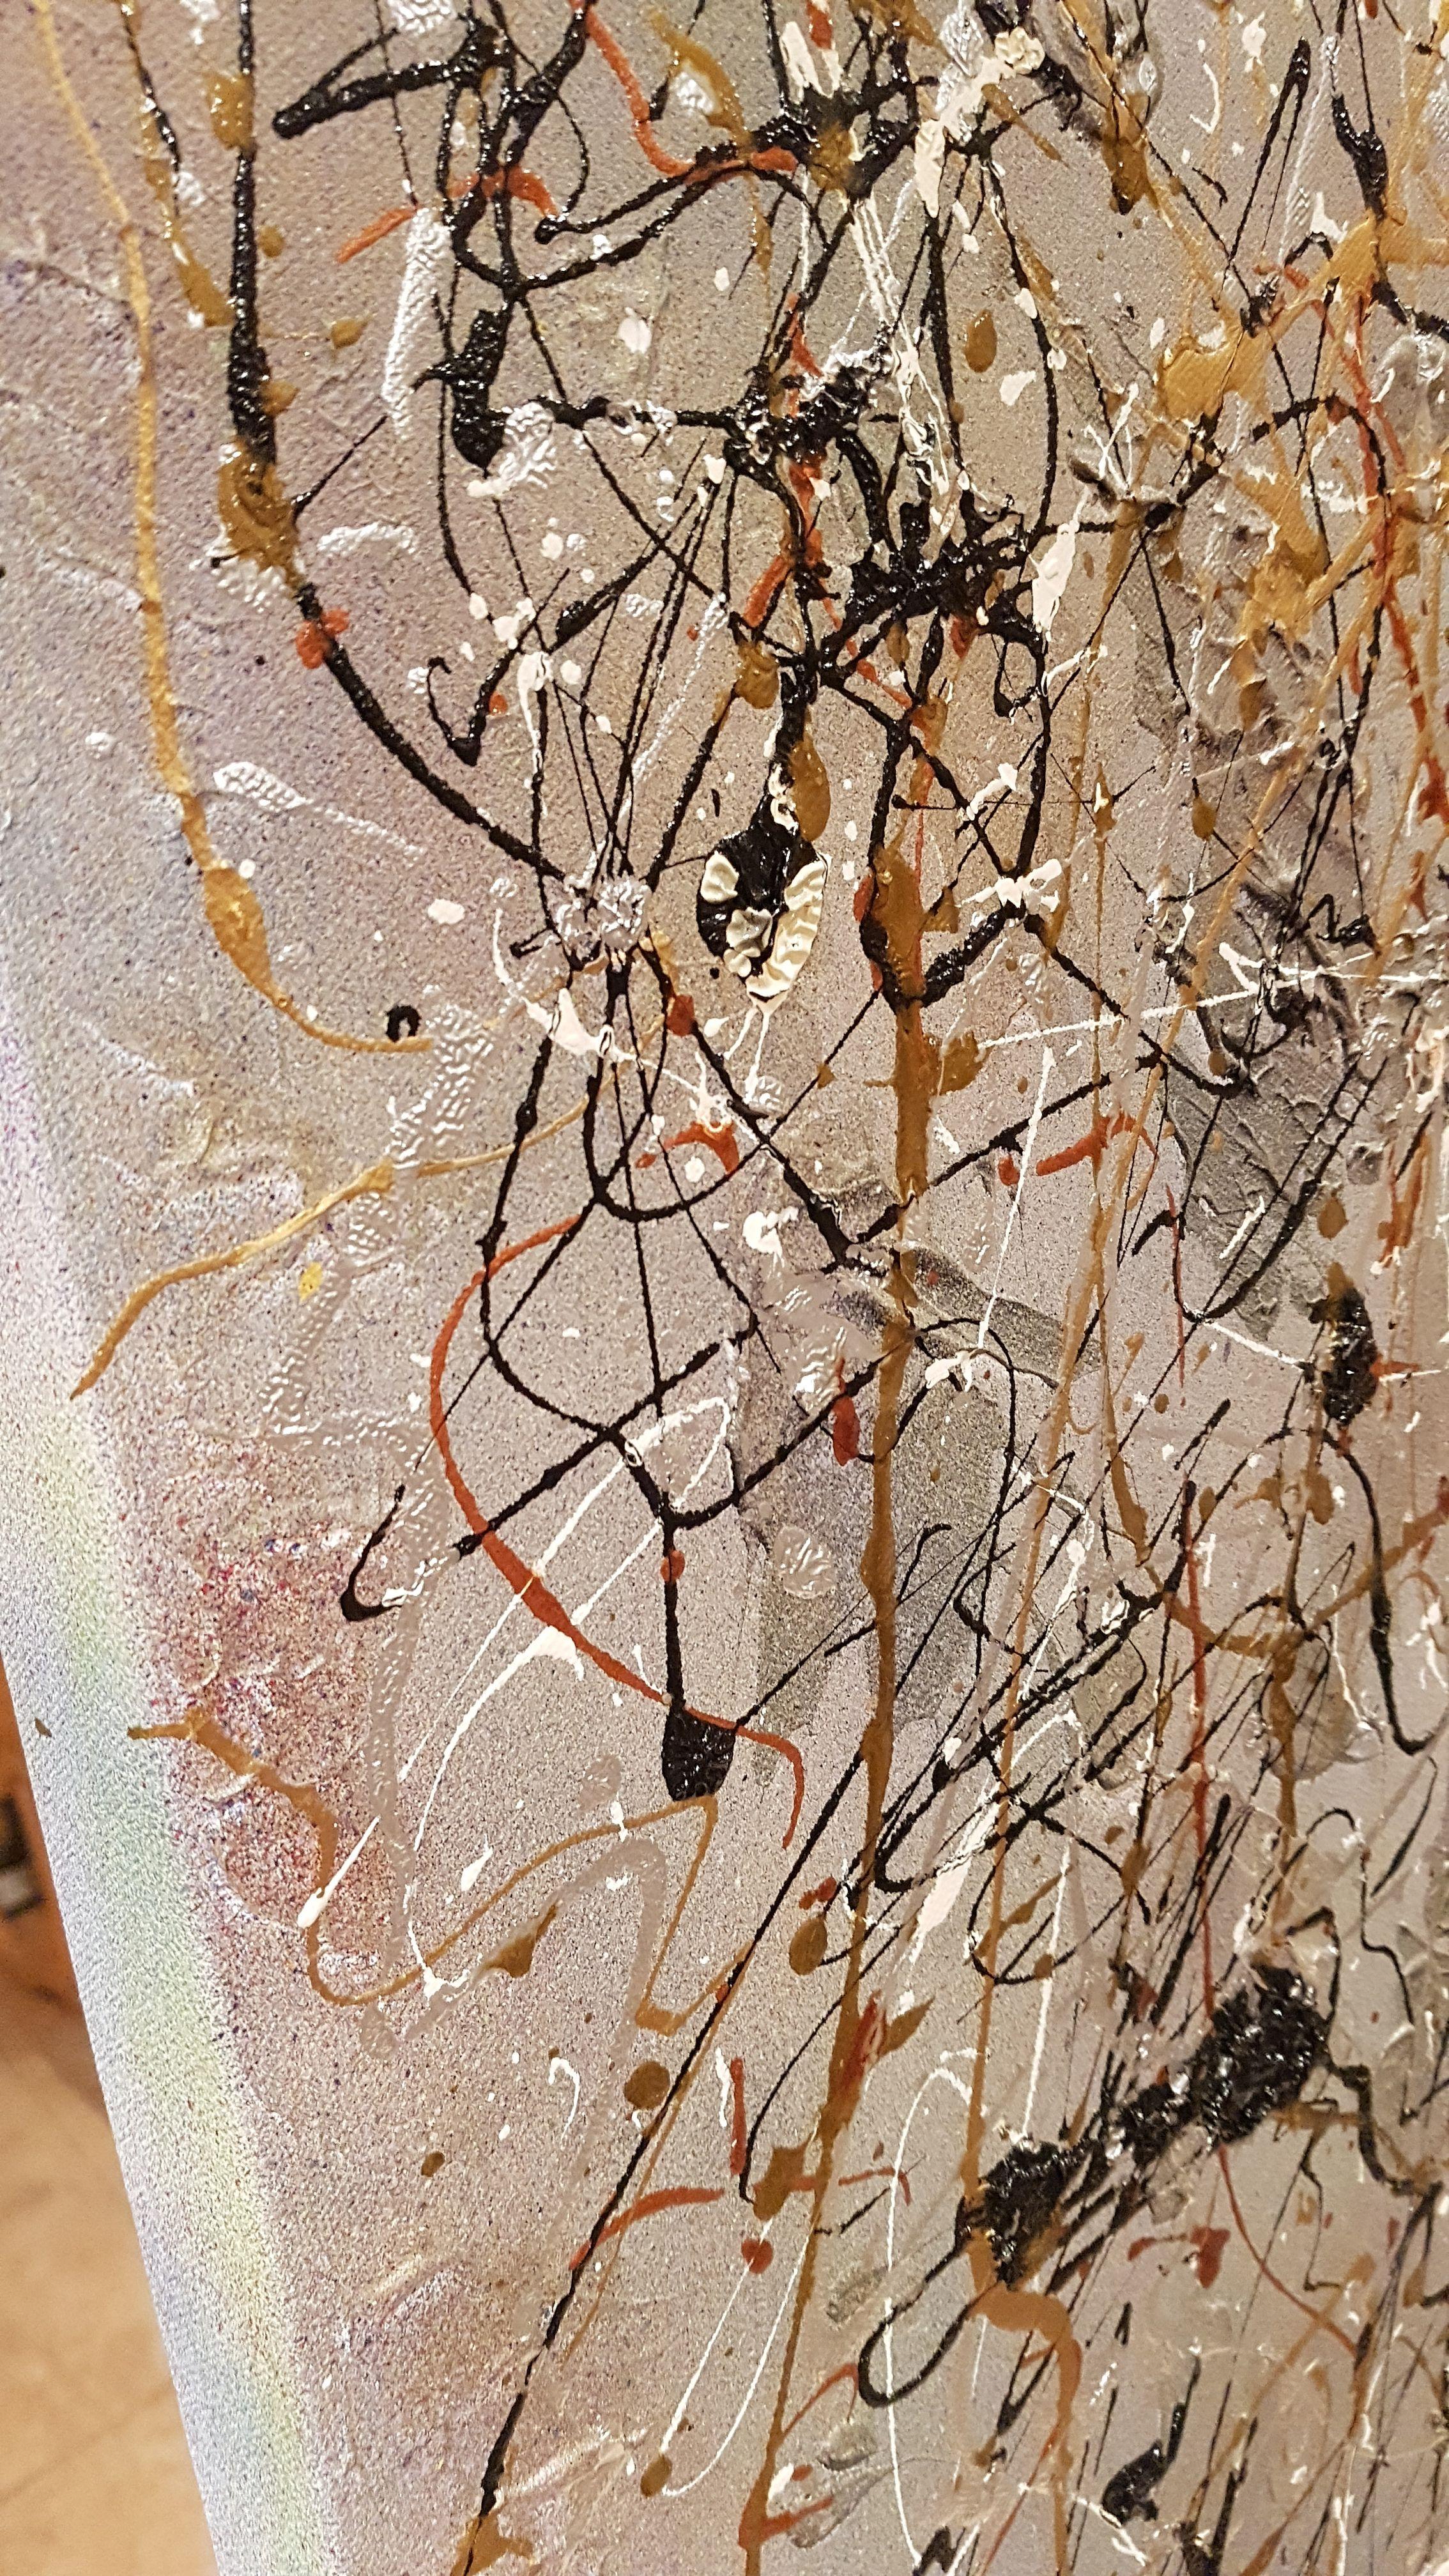 Musical Abstractions is an expressive large statement piece with a sophisticated style and elegant colour scheme comprised of metallic silver, gold, bronze, brass, and cool greys.    Unique mixed-media painting that was inspired by the freeing